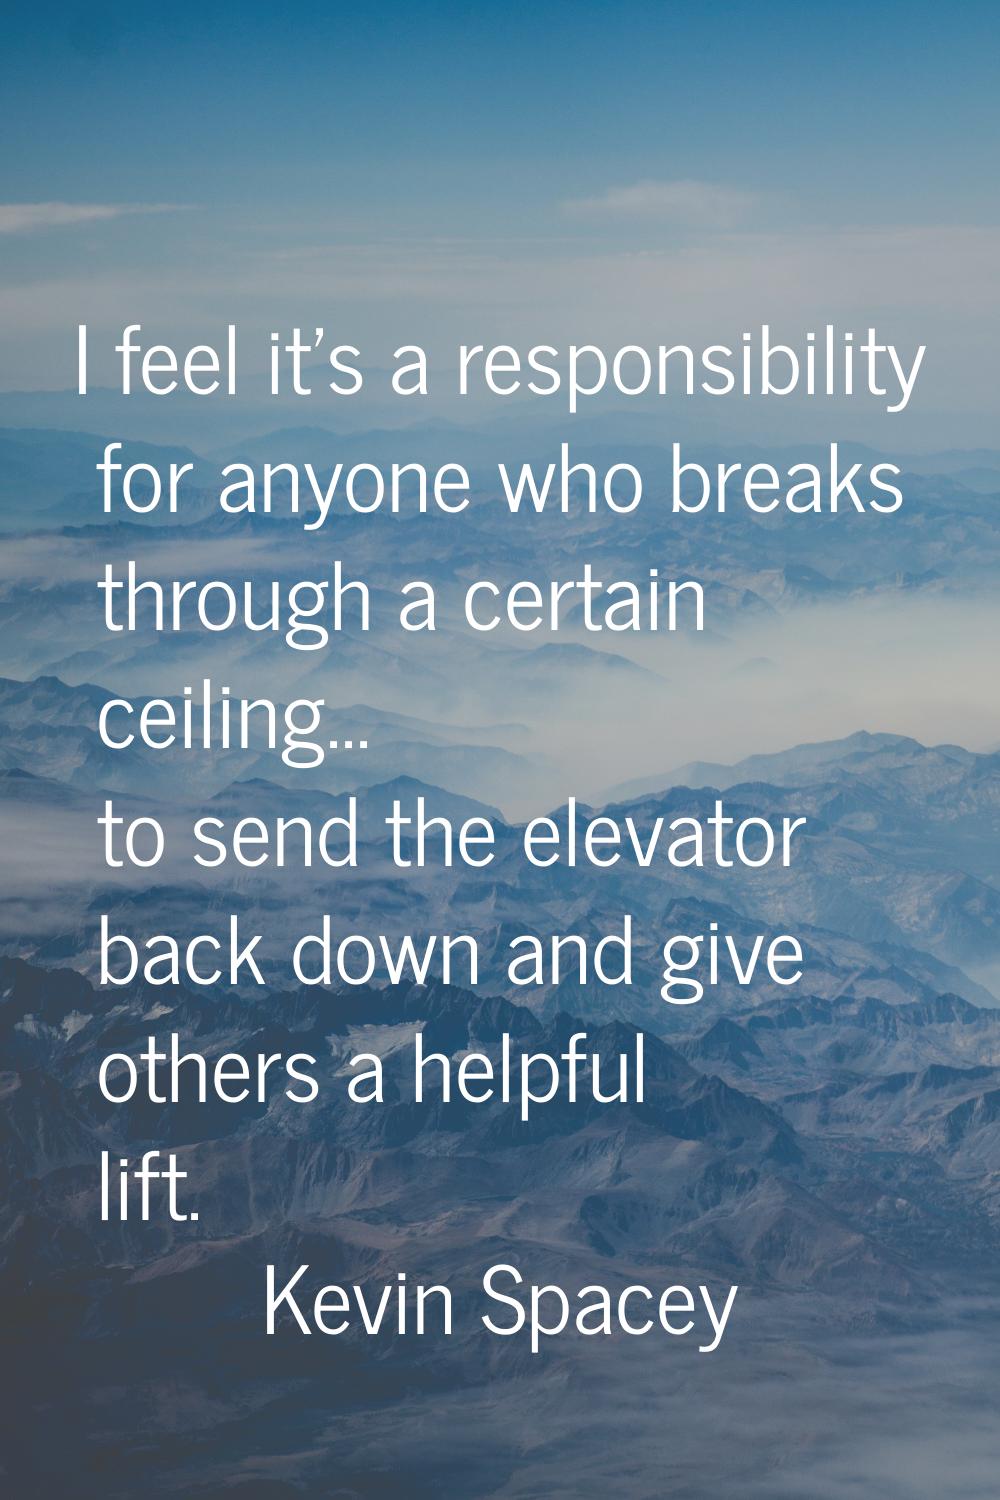 I feel it's a responsibility for anyone who breaks through a certain ceiling... to send the elevato